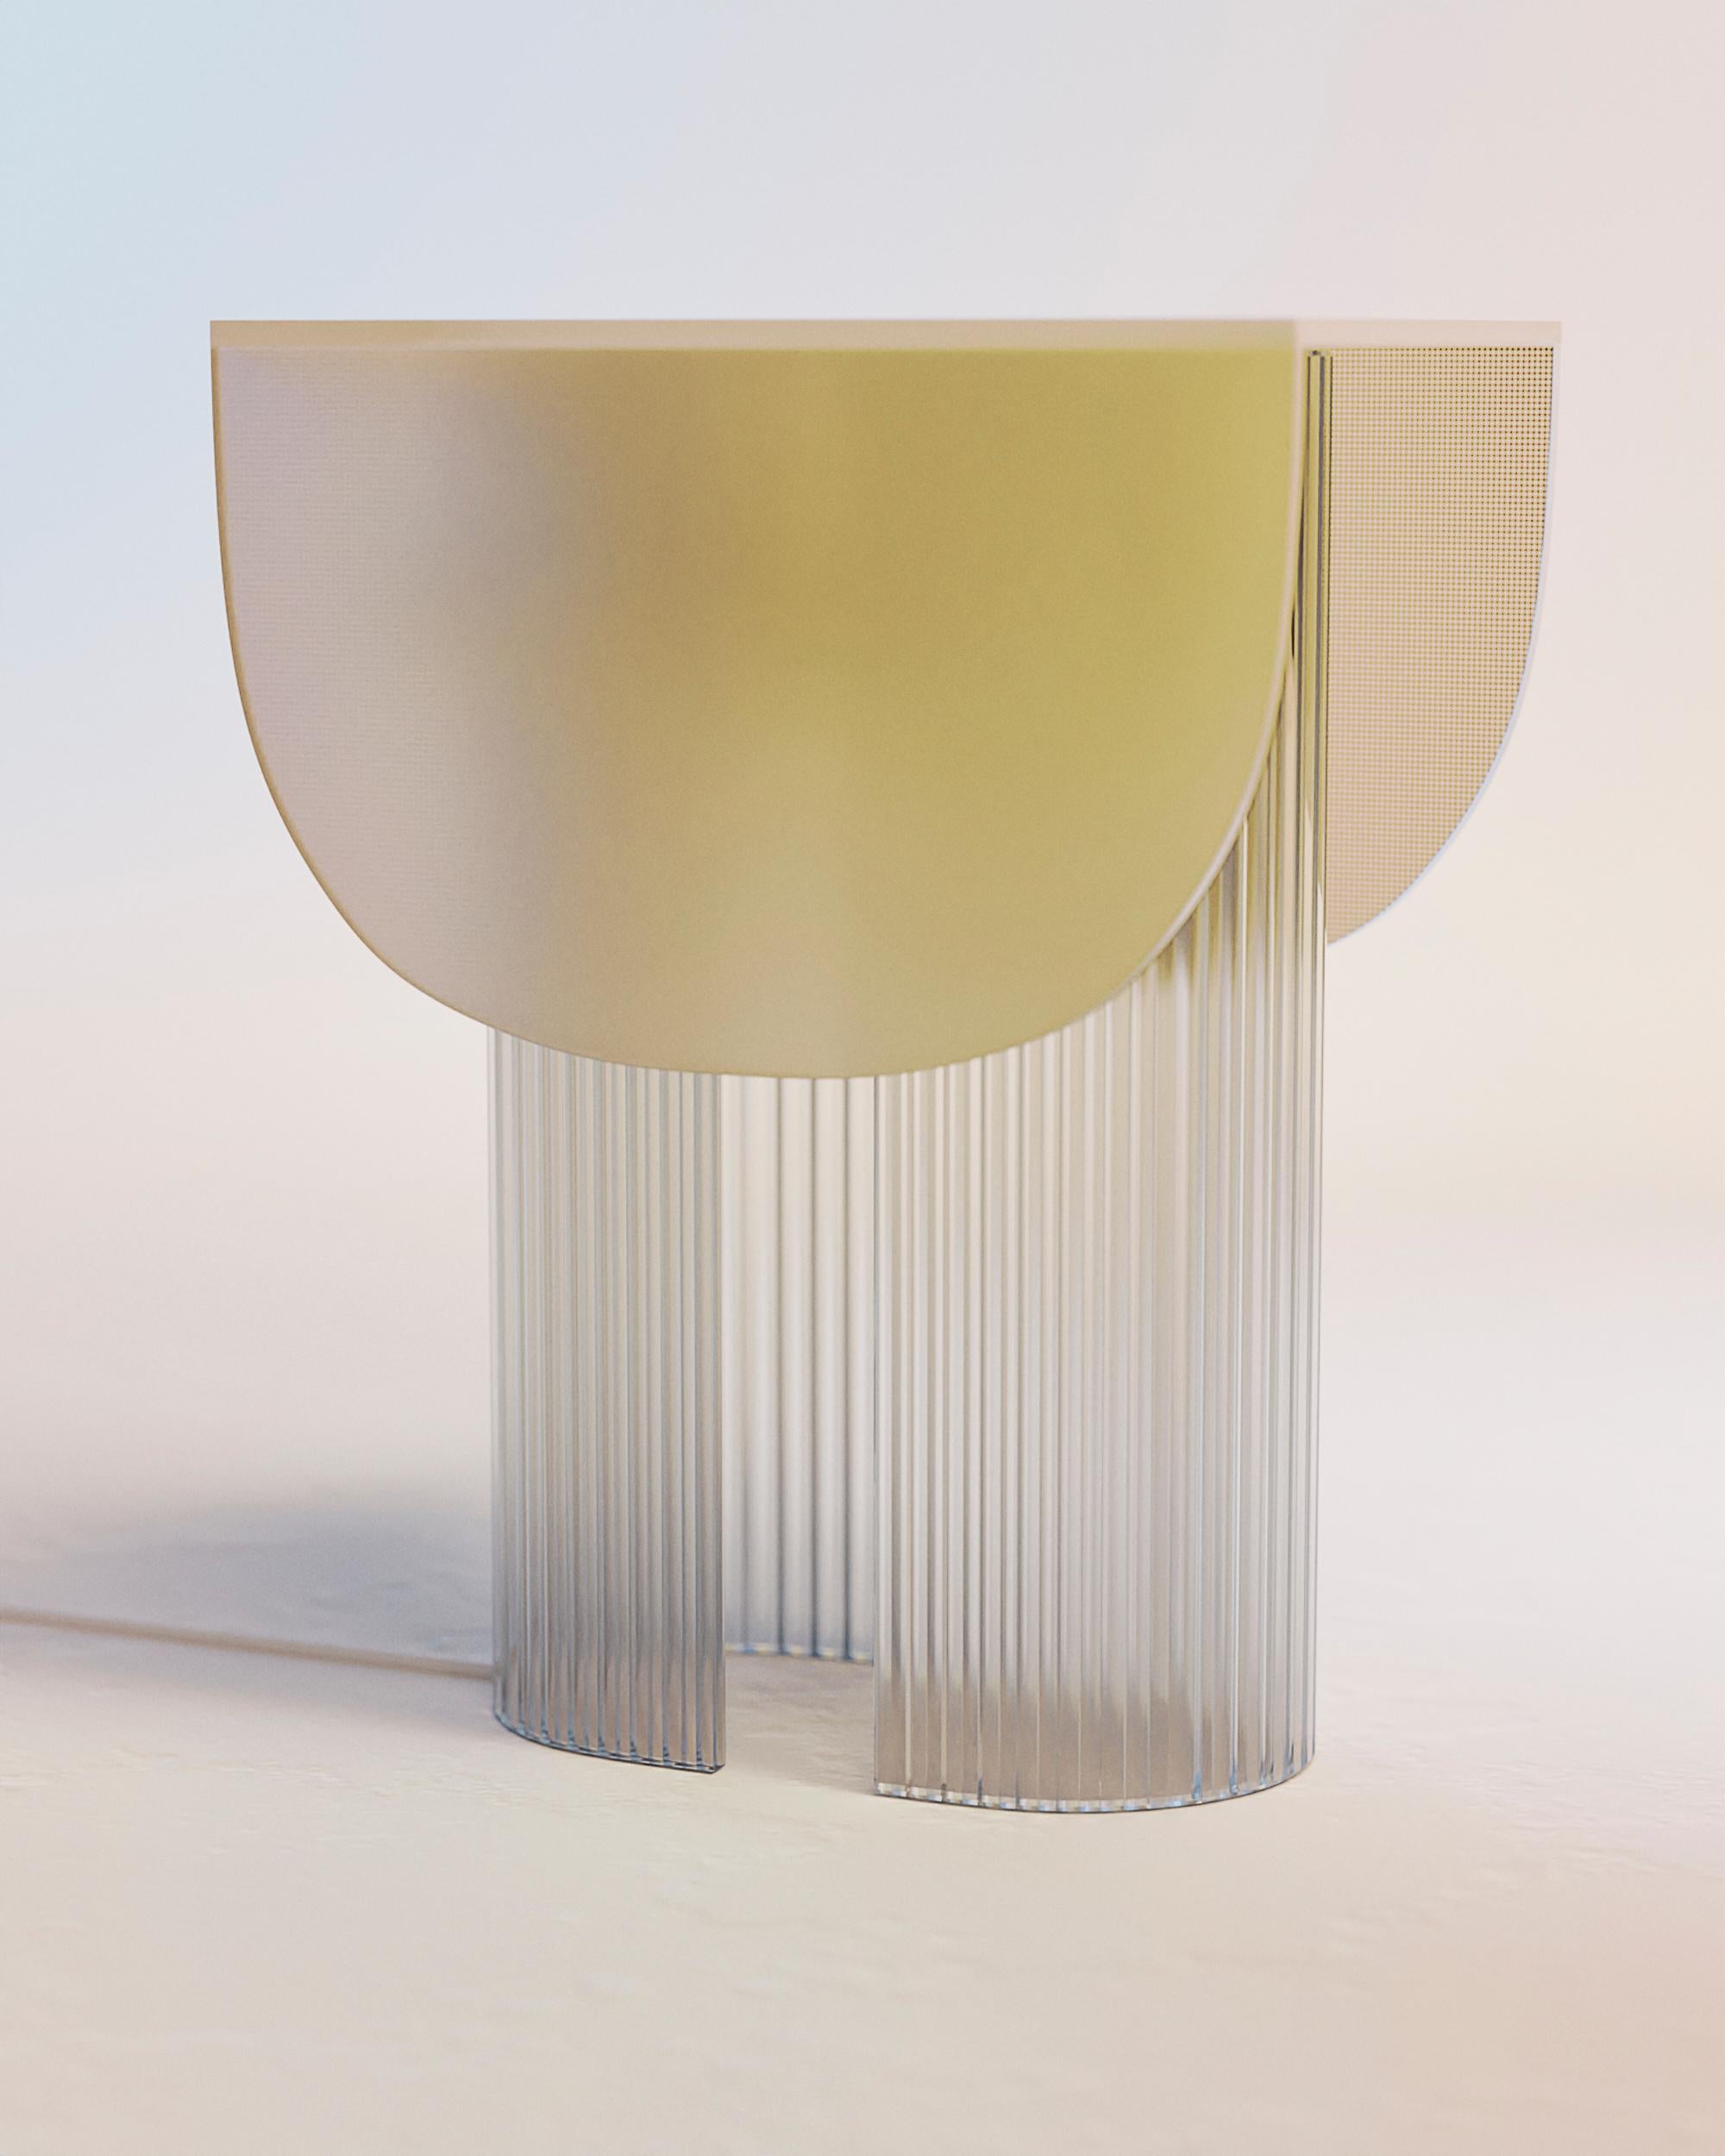 Straw Helia Table Lamp by Glass Variations
Dimensions: W 22 x D 31 x H 40 cm
Materials: Glass.

With this 100% glass table lamp Bina Baitel celebrates light and sun. Its curved patterned glass structure and the satin finished glass cap diffuse a